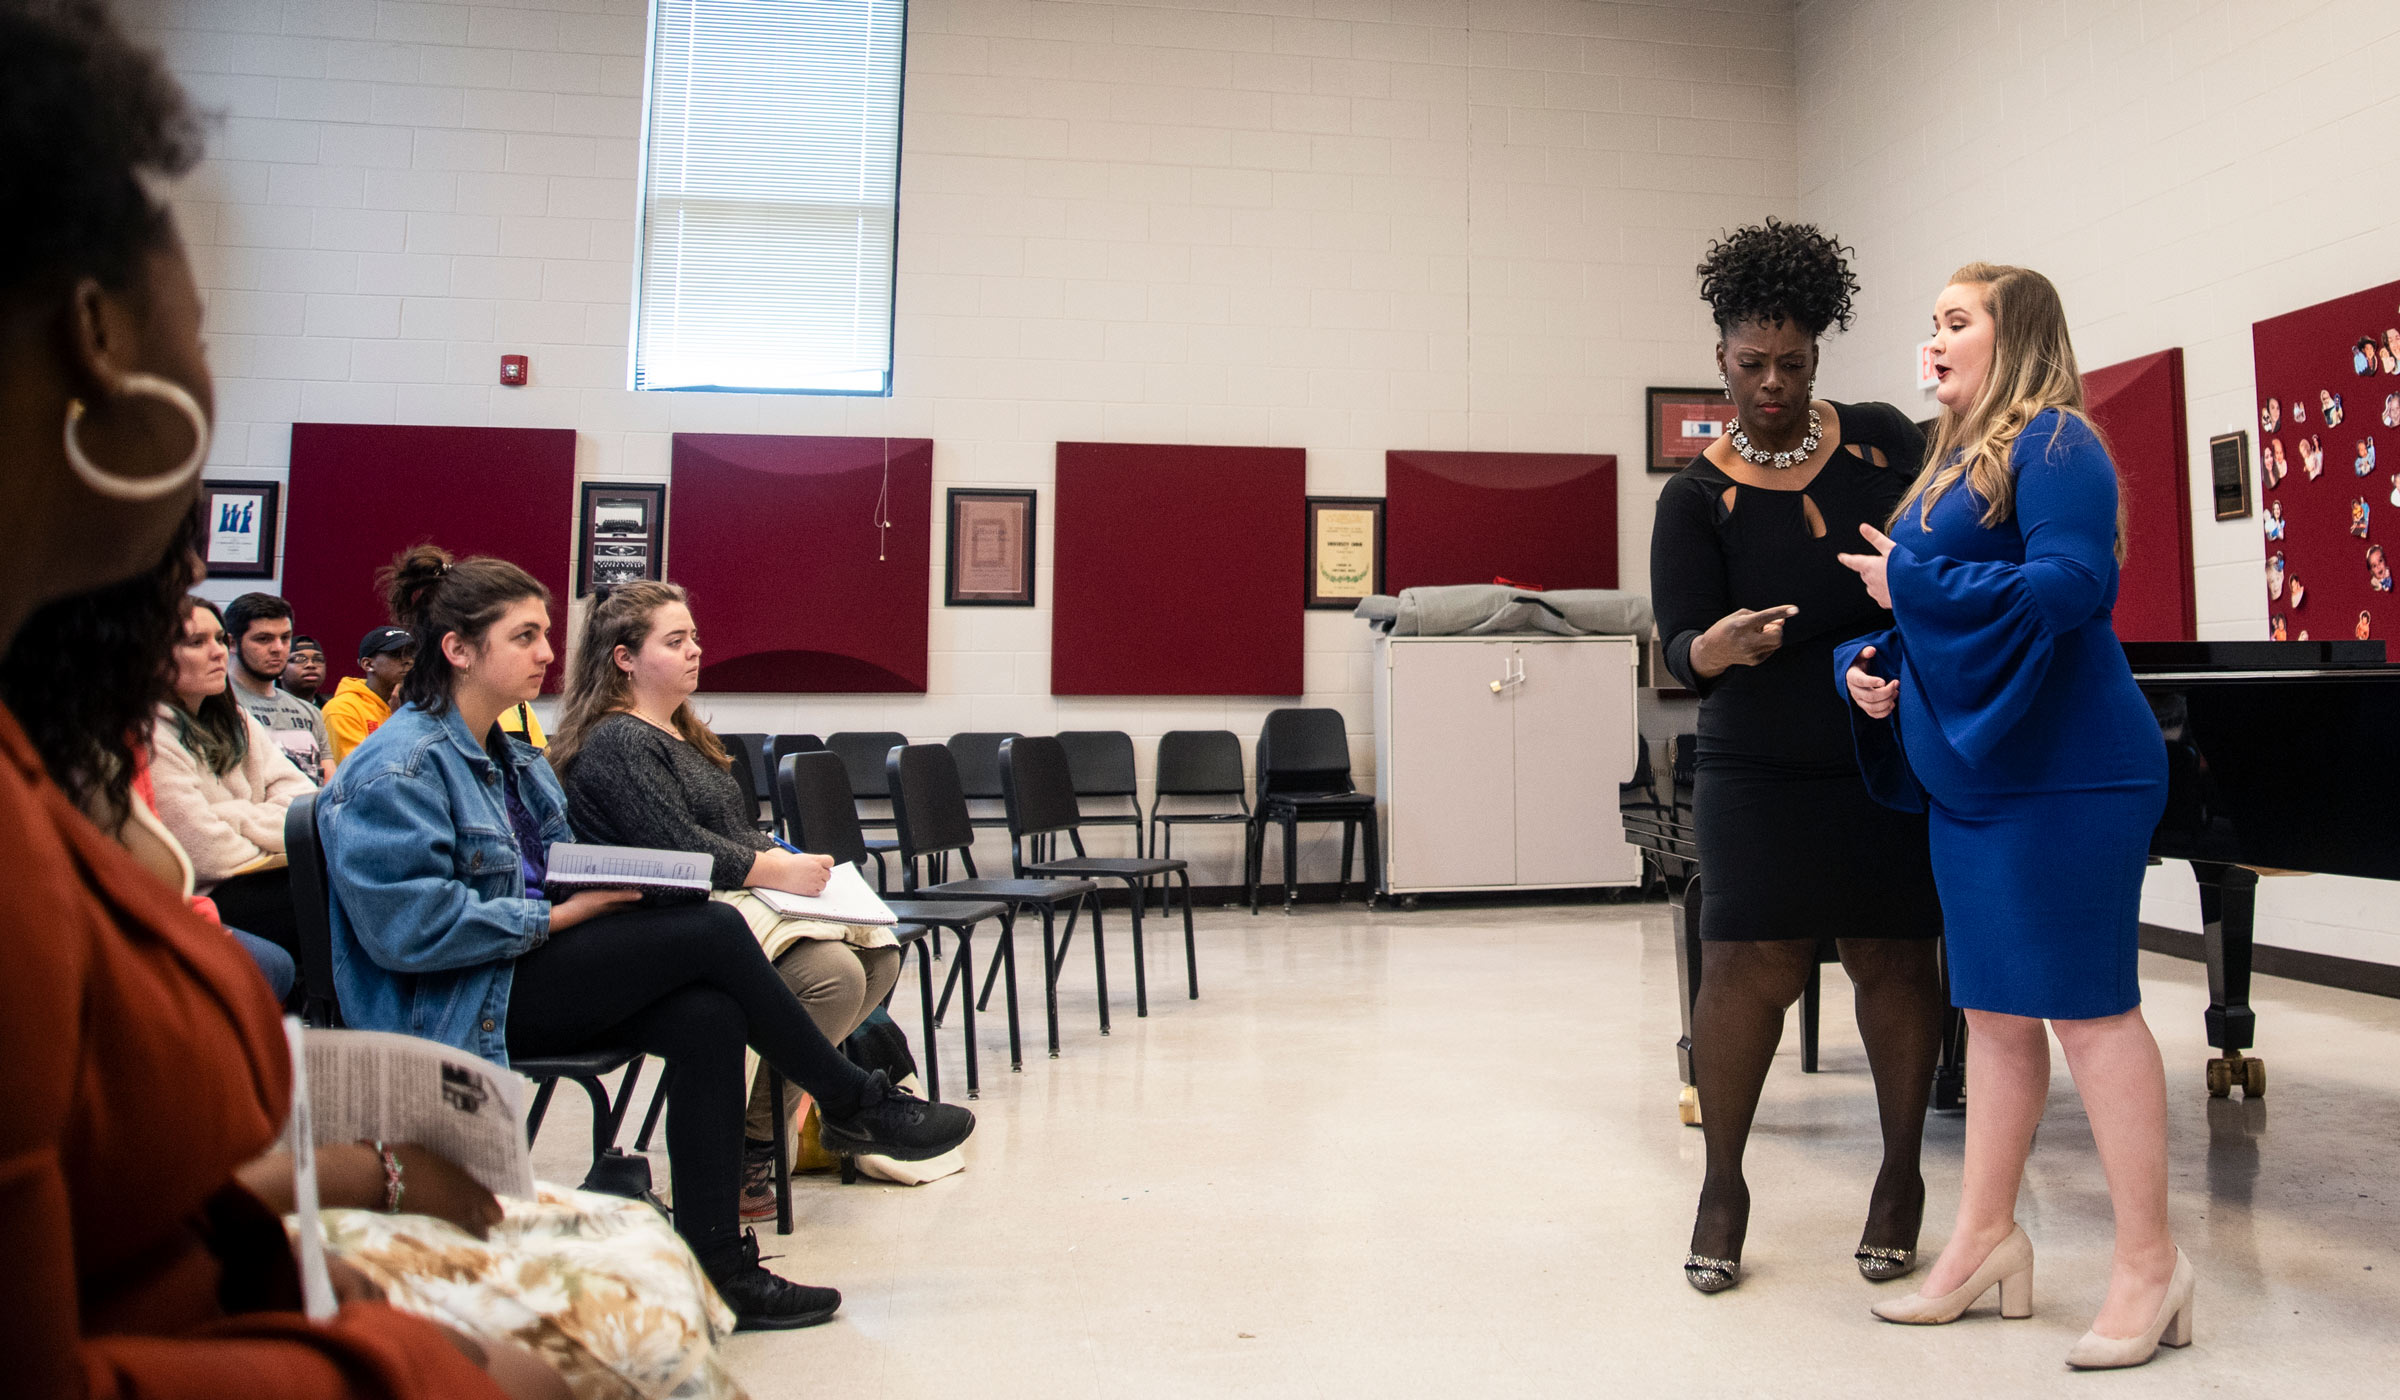  Internationally-acclaimed opera singer Indra Thomas works with music student Payton Tanner on vocal techniques, character and expression, as well as sharing insights about the professional singing world. 